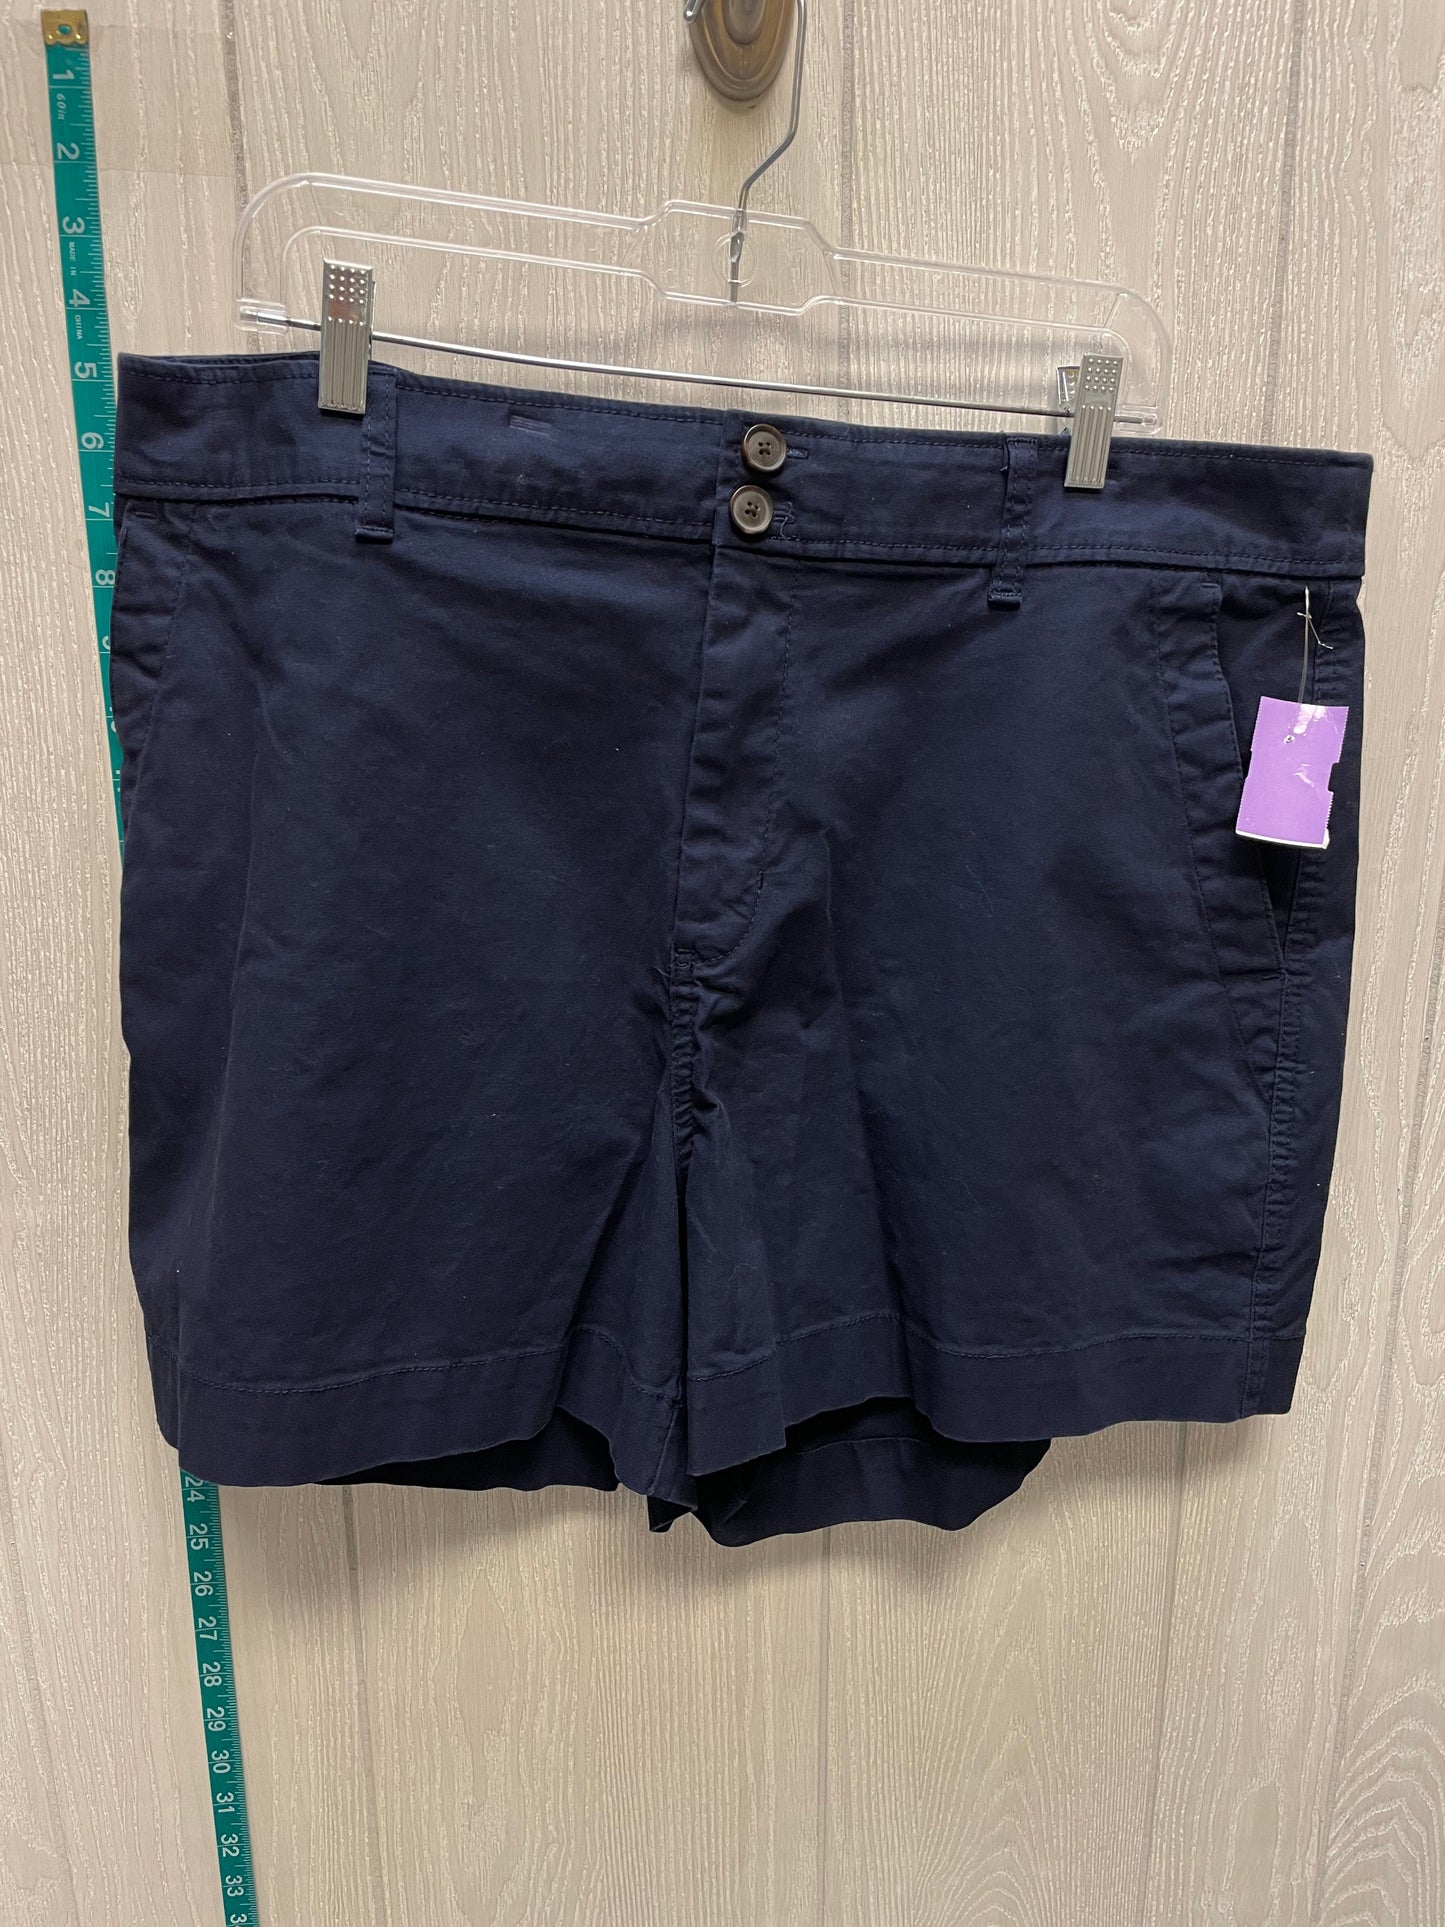 Navy Shorts A New Day, Size 18